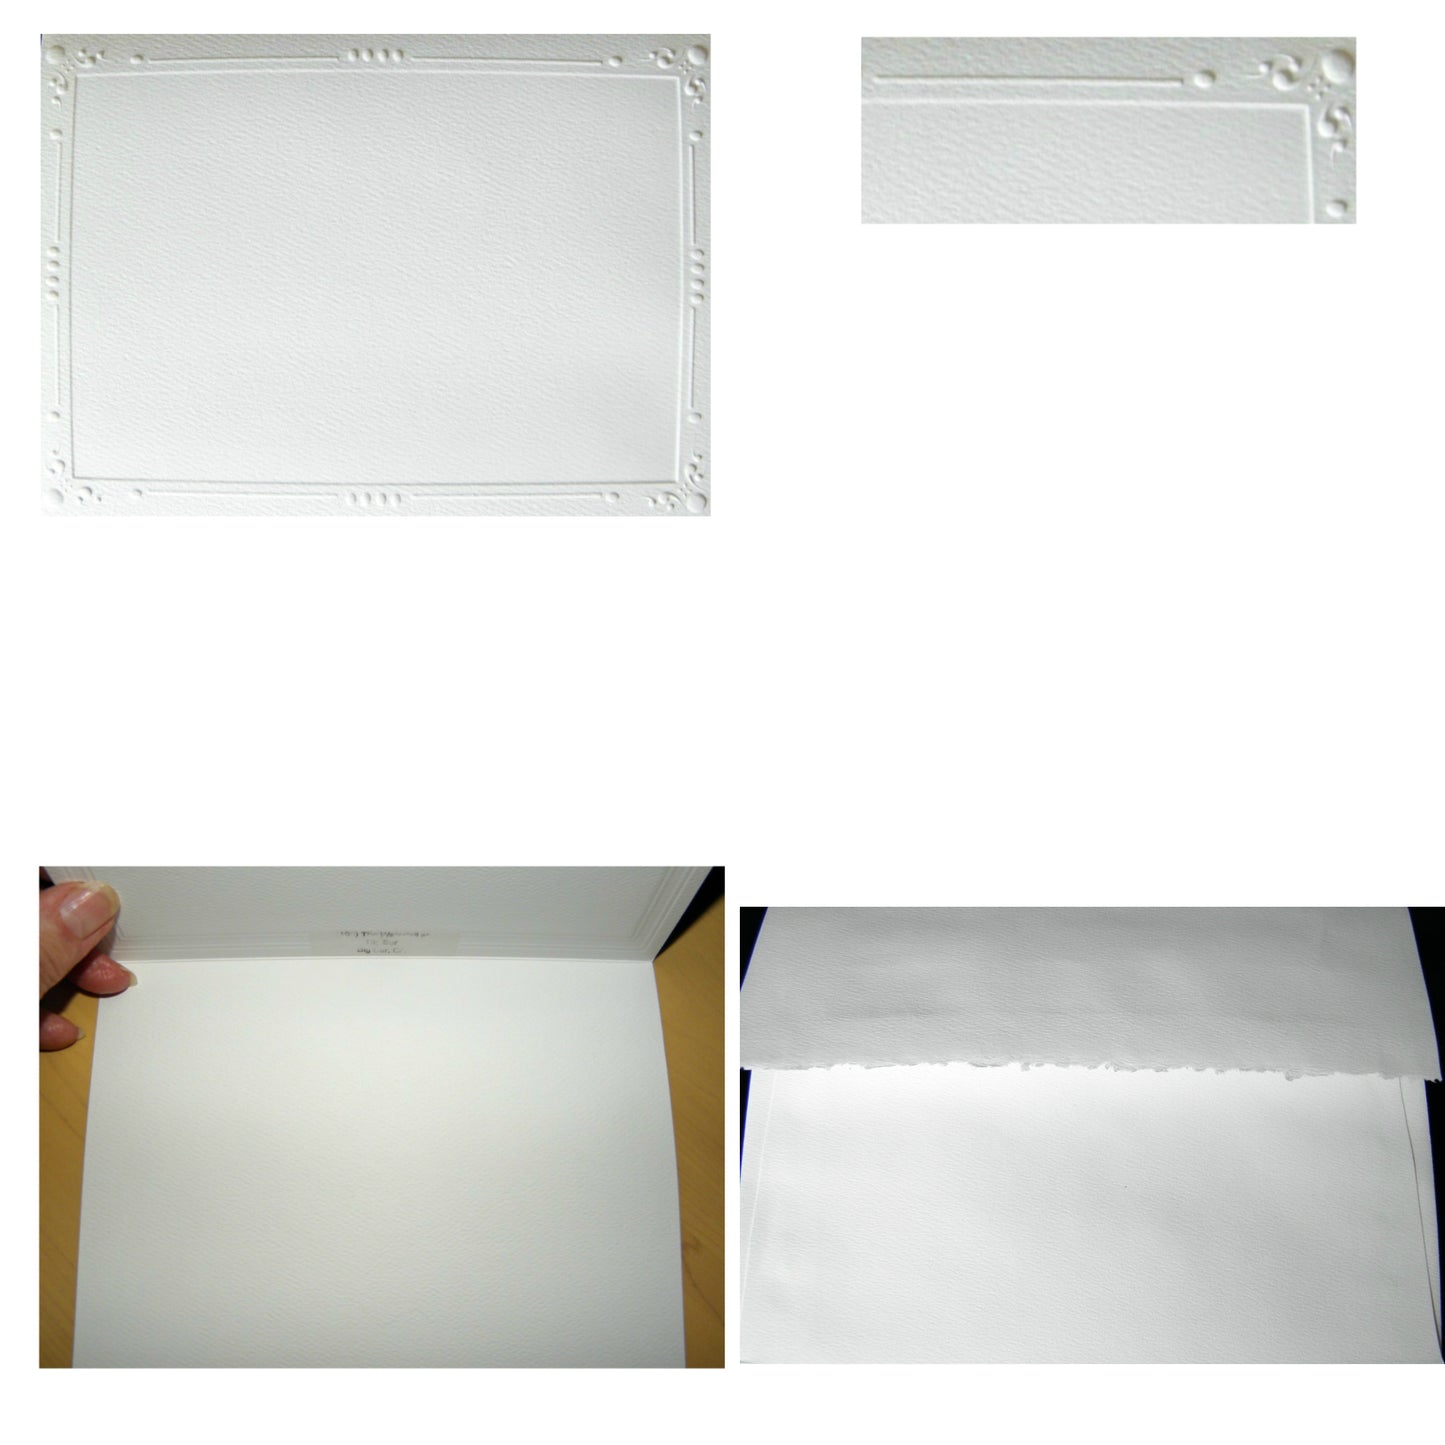 Photo of the deluxe Decorative Card Stock, the Blank-inside view, and  the coordinating Decorative envelope 